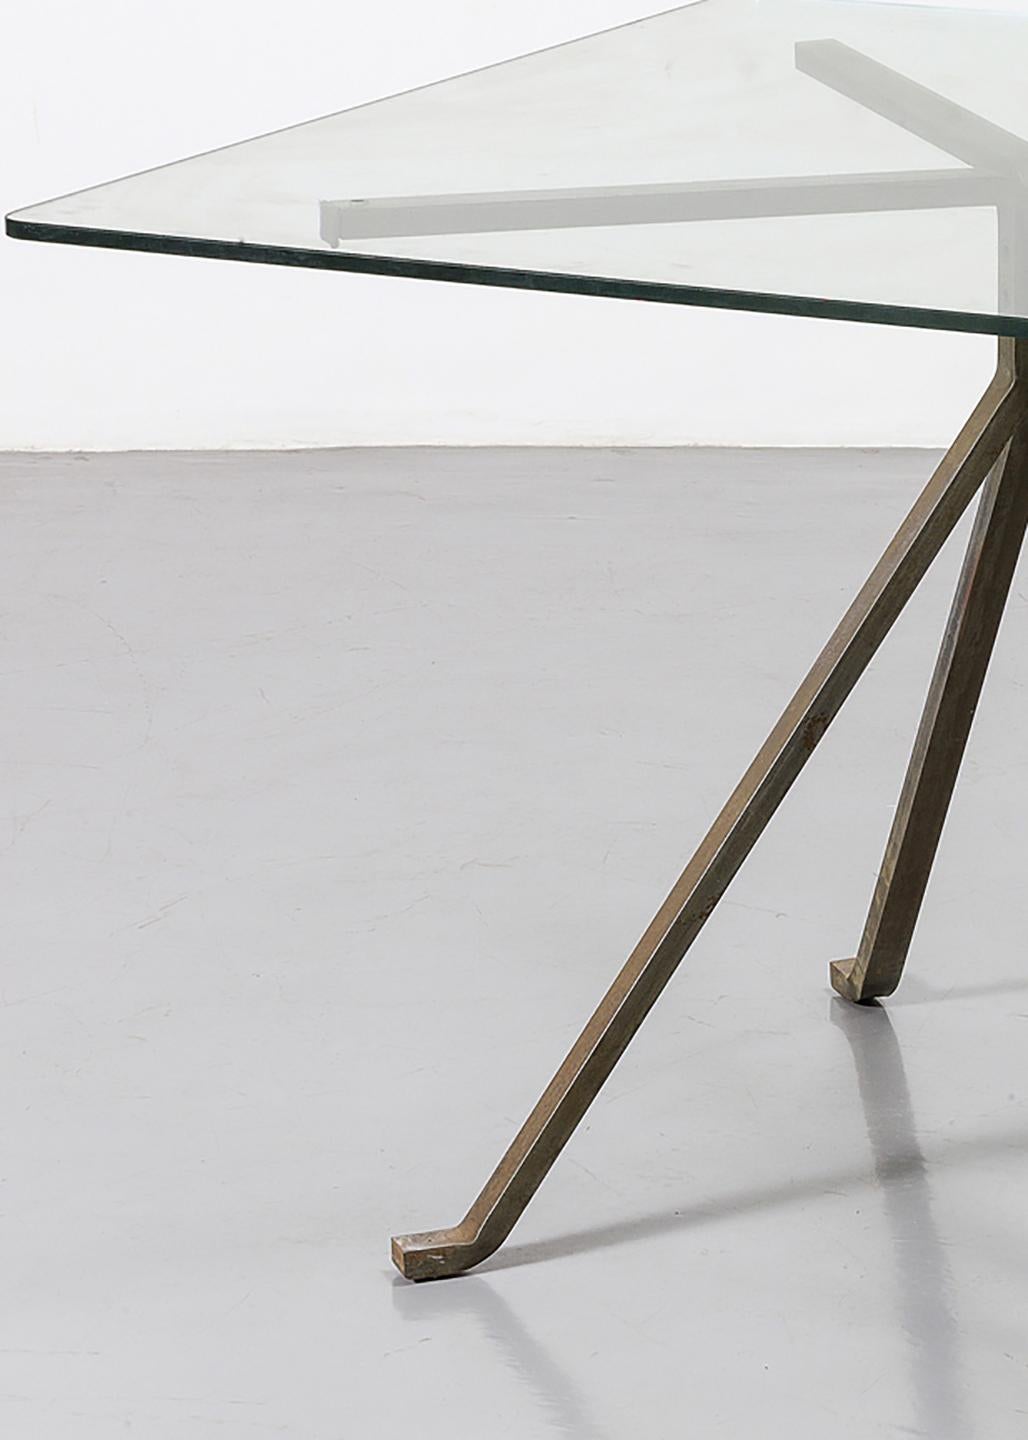 An Enzo Mari designed dining table for the 